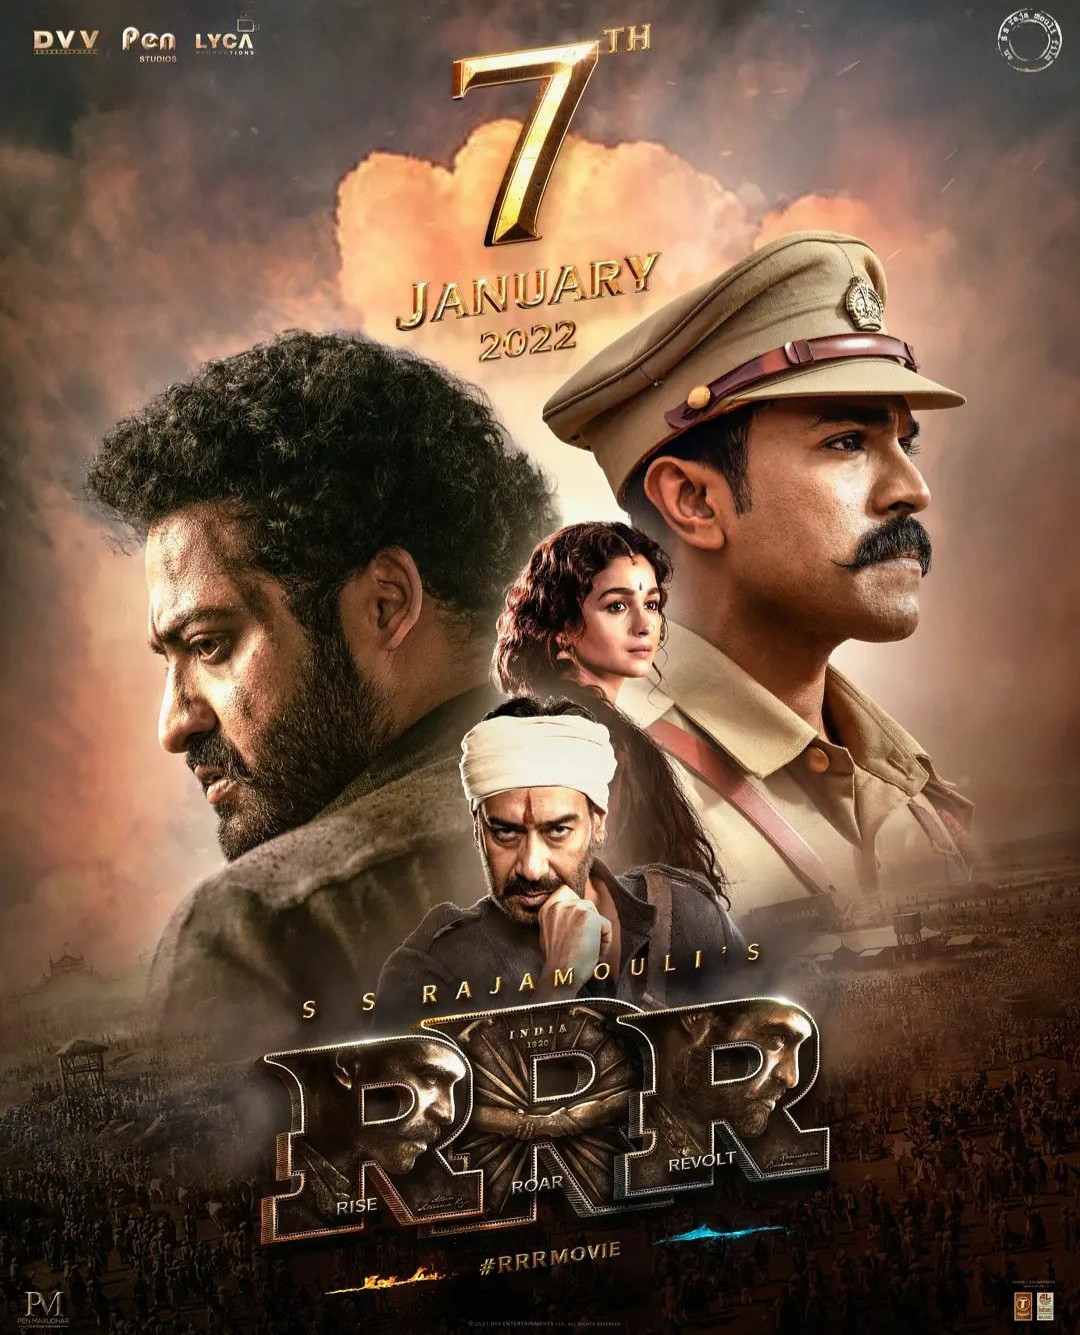 RRR 2022 Hindi Dubbed Movie Official Trailer 1080p HDRip Free Download